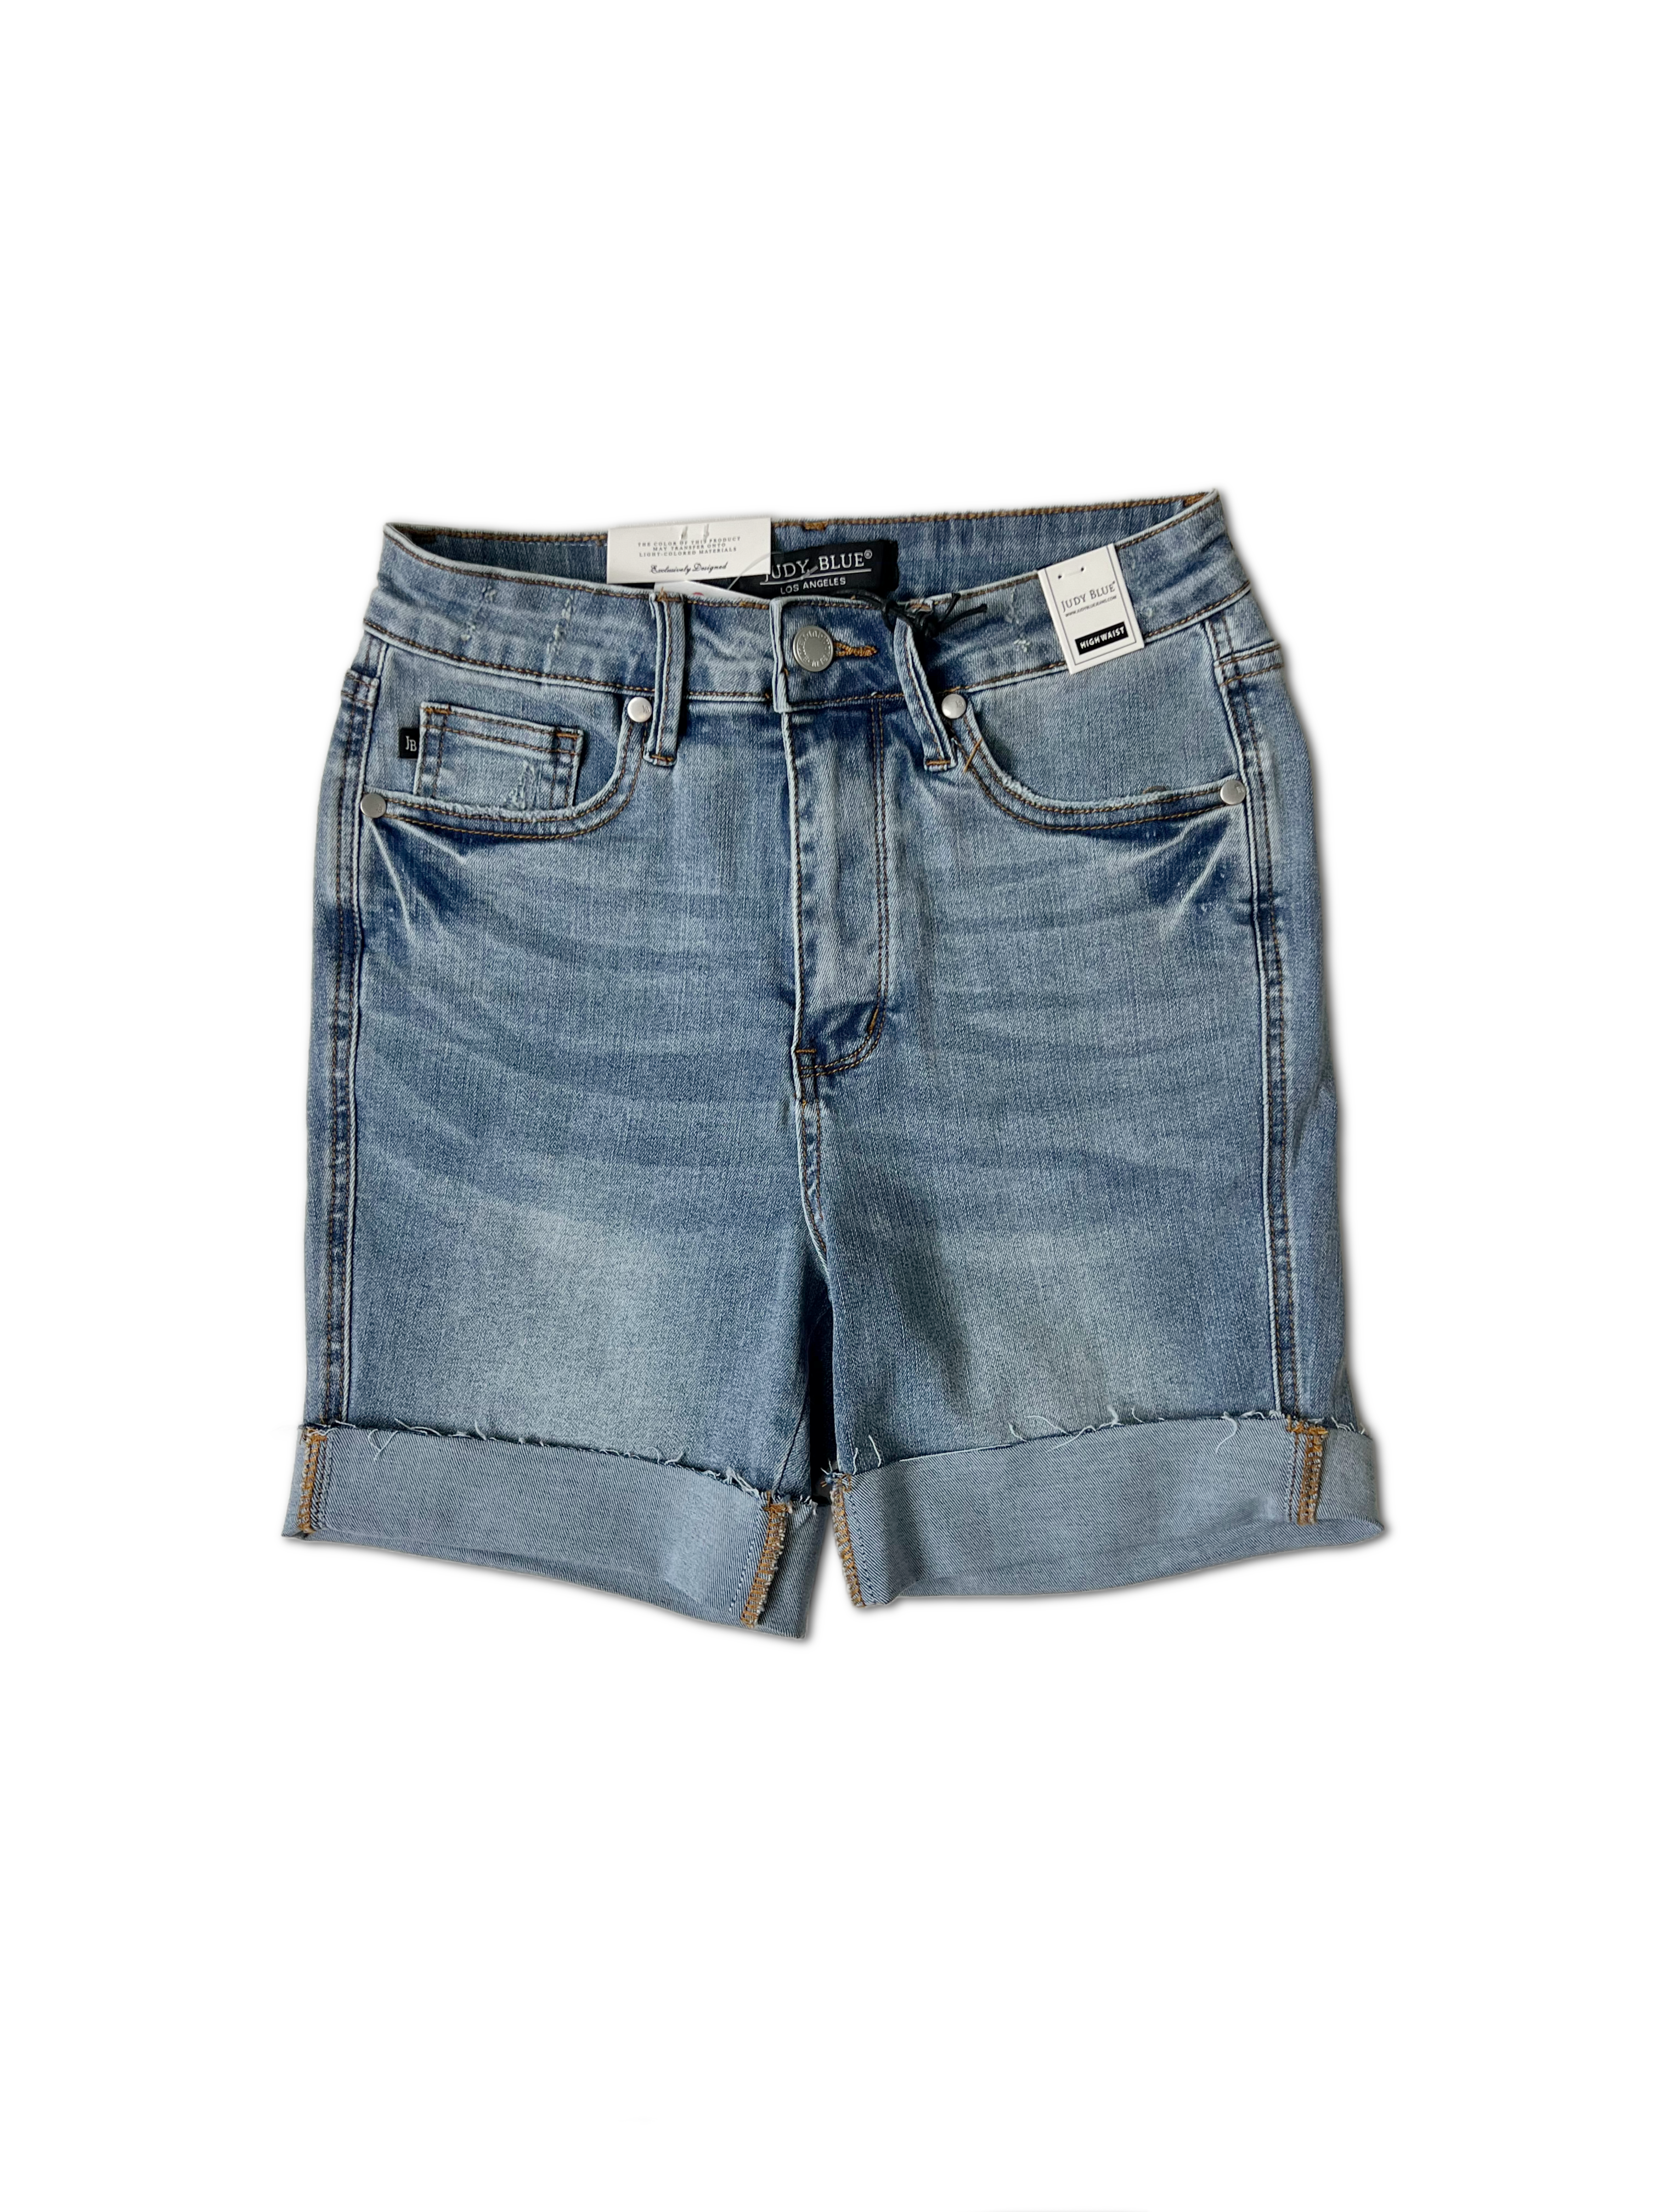 Best of Both Worlds Judy Blue Shorts JB Boutique Simplified